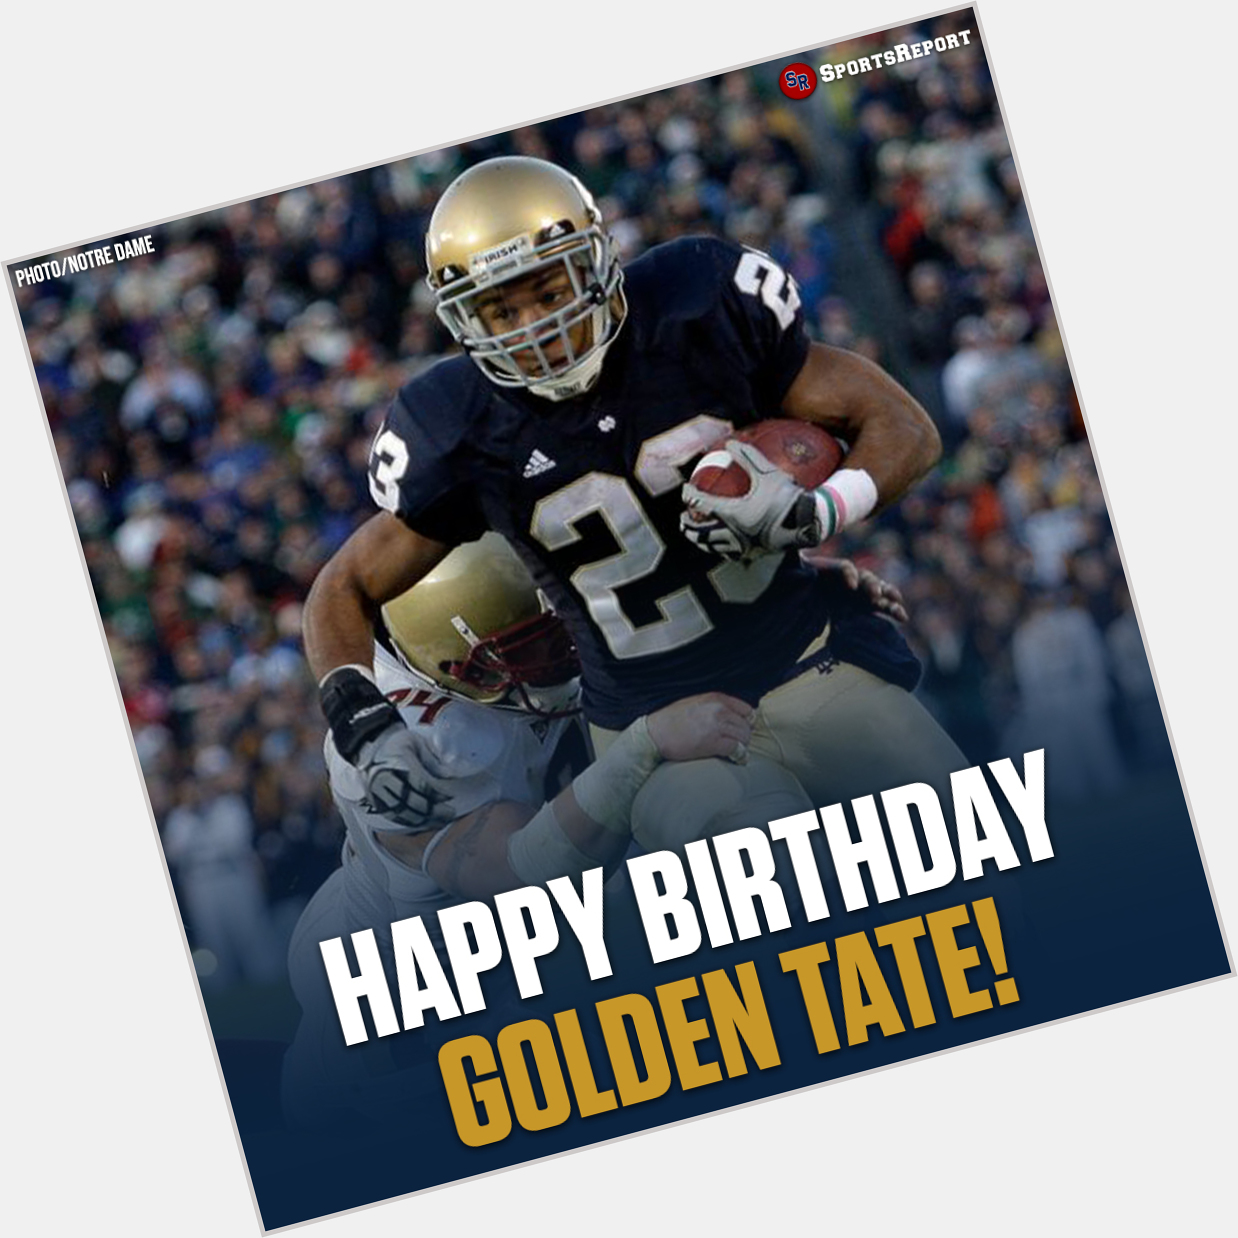  Fans, let\s wish great Golden Tate a Happy Birthday! 